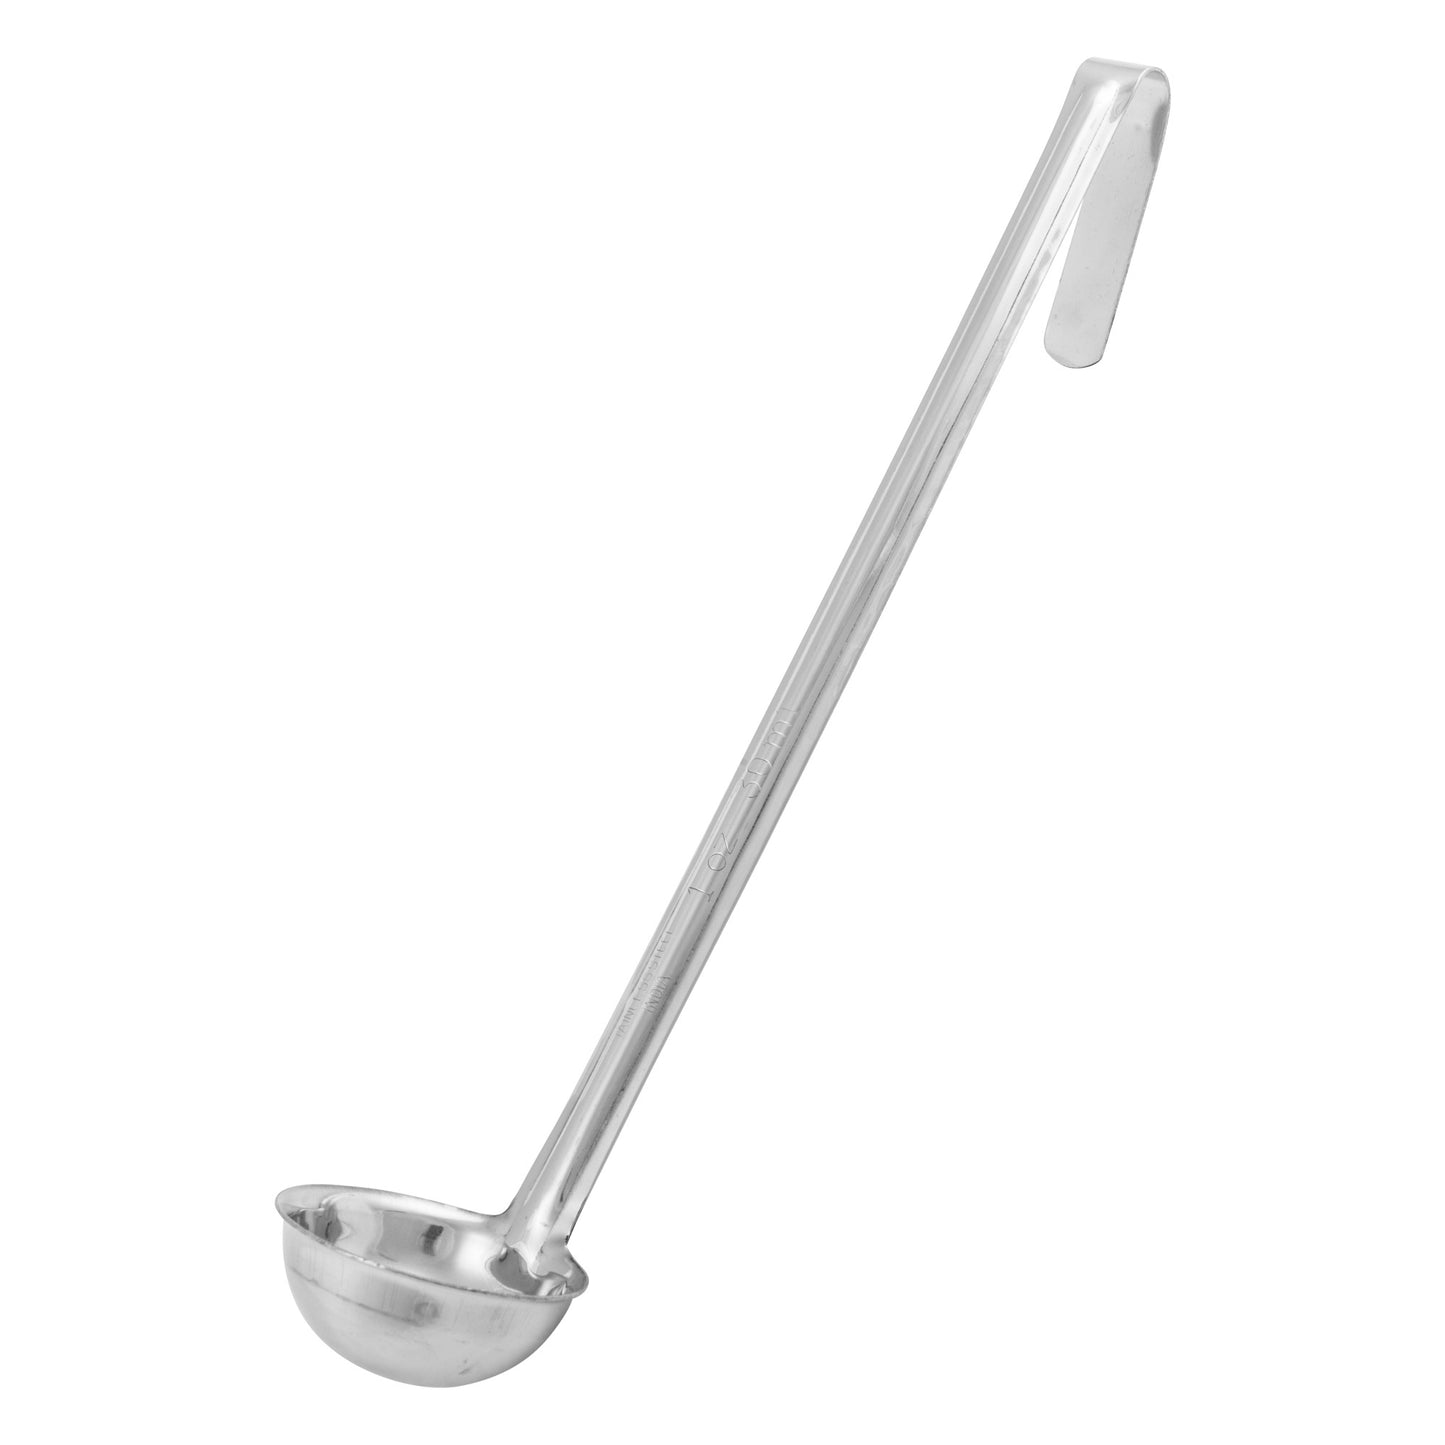 LDIN-1 - Winco Prime One-Piece Ladle, Stainless Steel - 1 oz